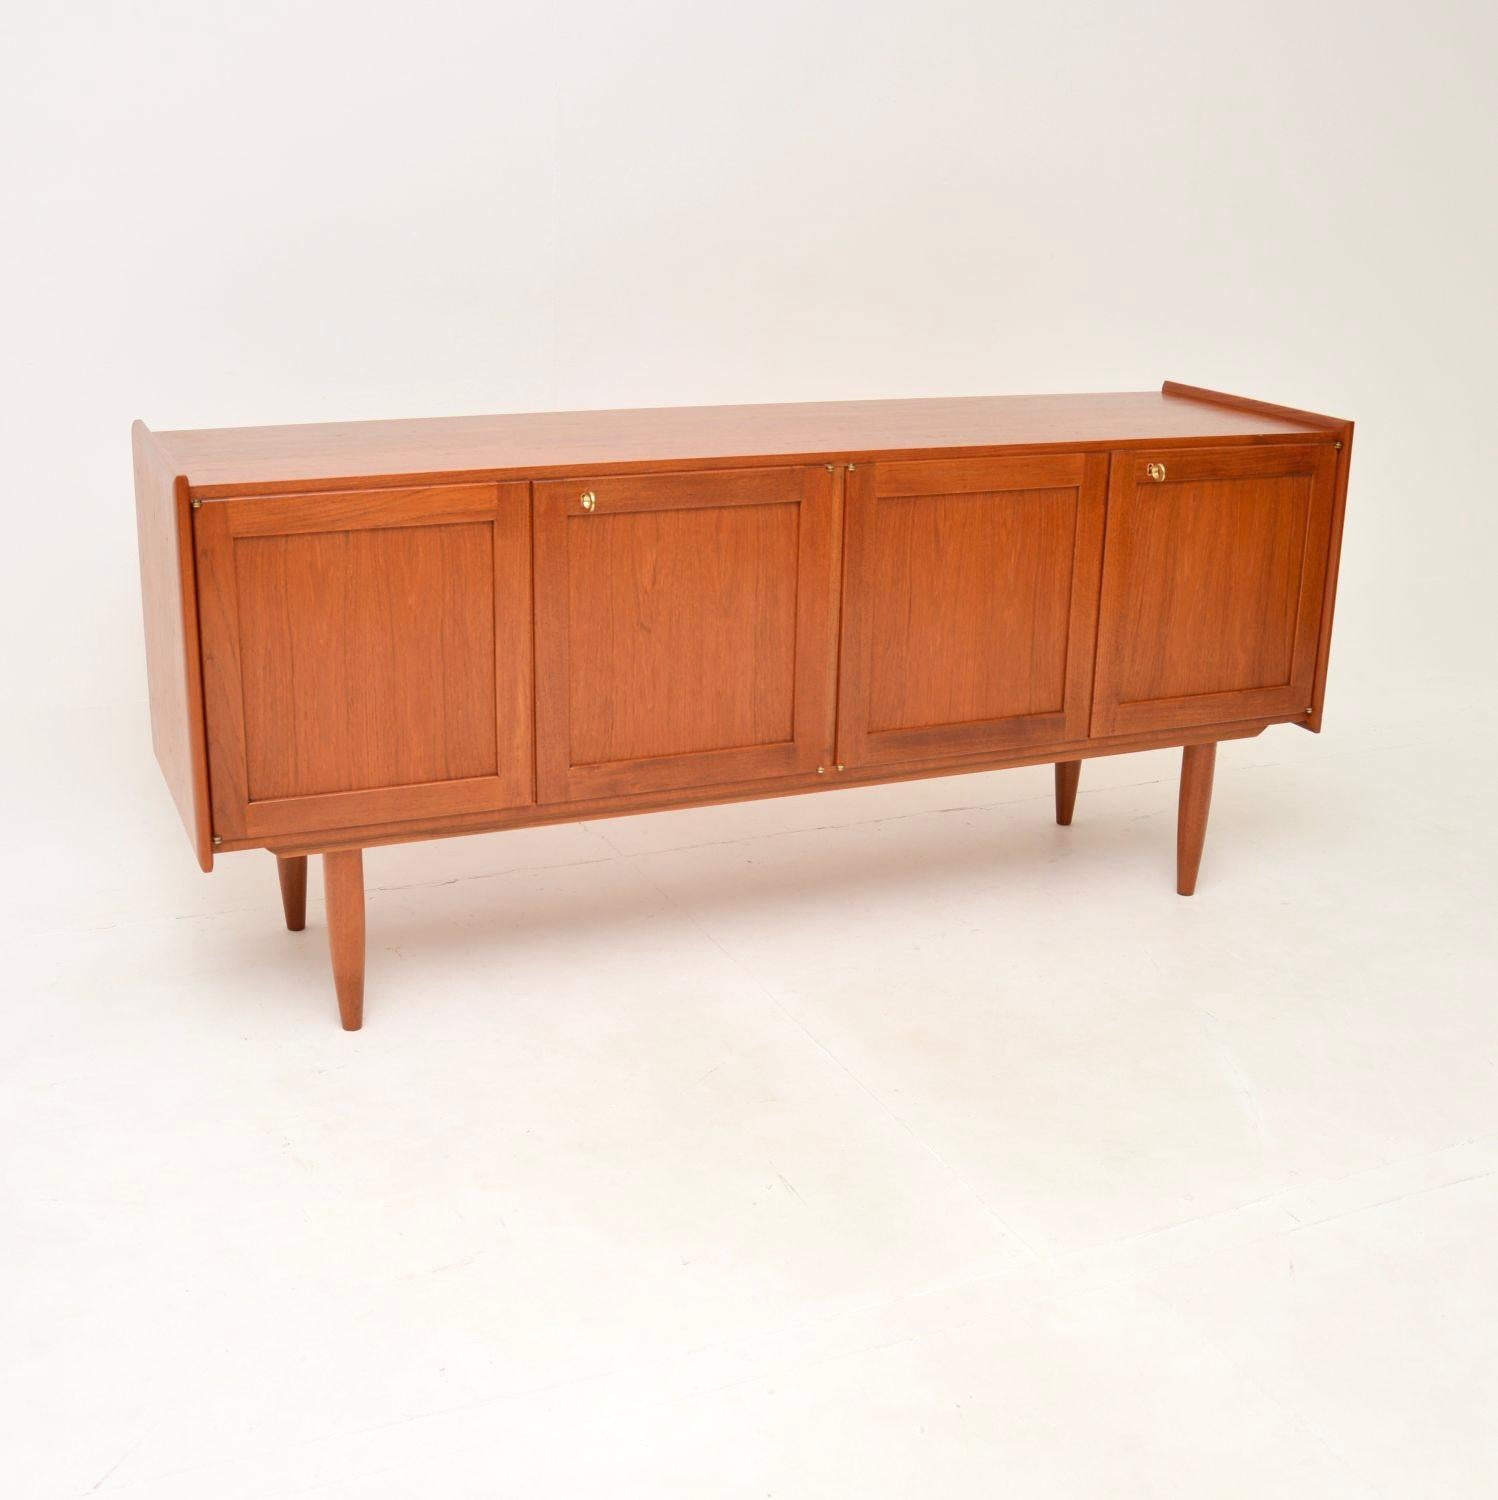 A stylish and extremely well made vintage Danish teak sideboard. This was made in Denmark, it dates from around the 1960’s.

The quality is outstanding, this is beautifully designed and is a very useful size. It sits on nicely tapered legs, the